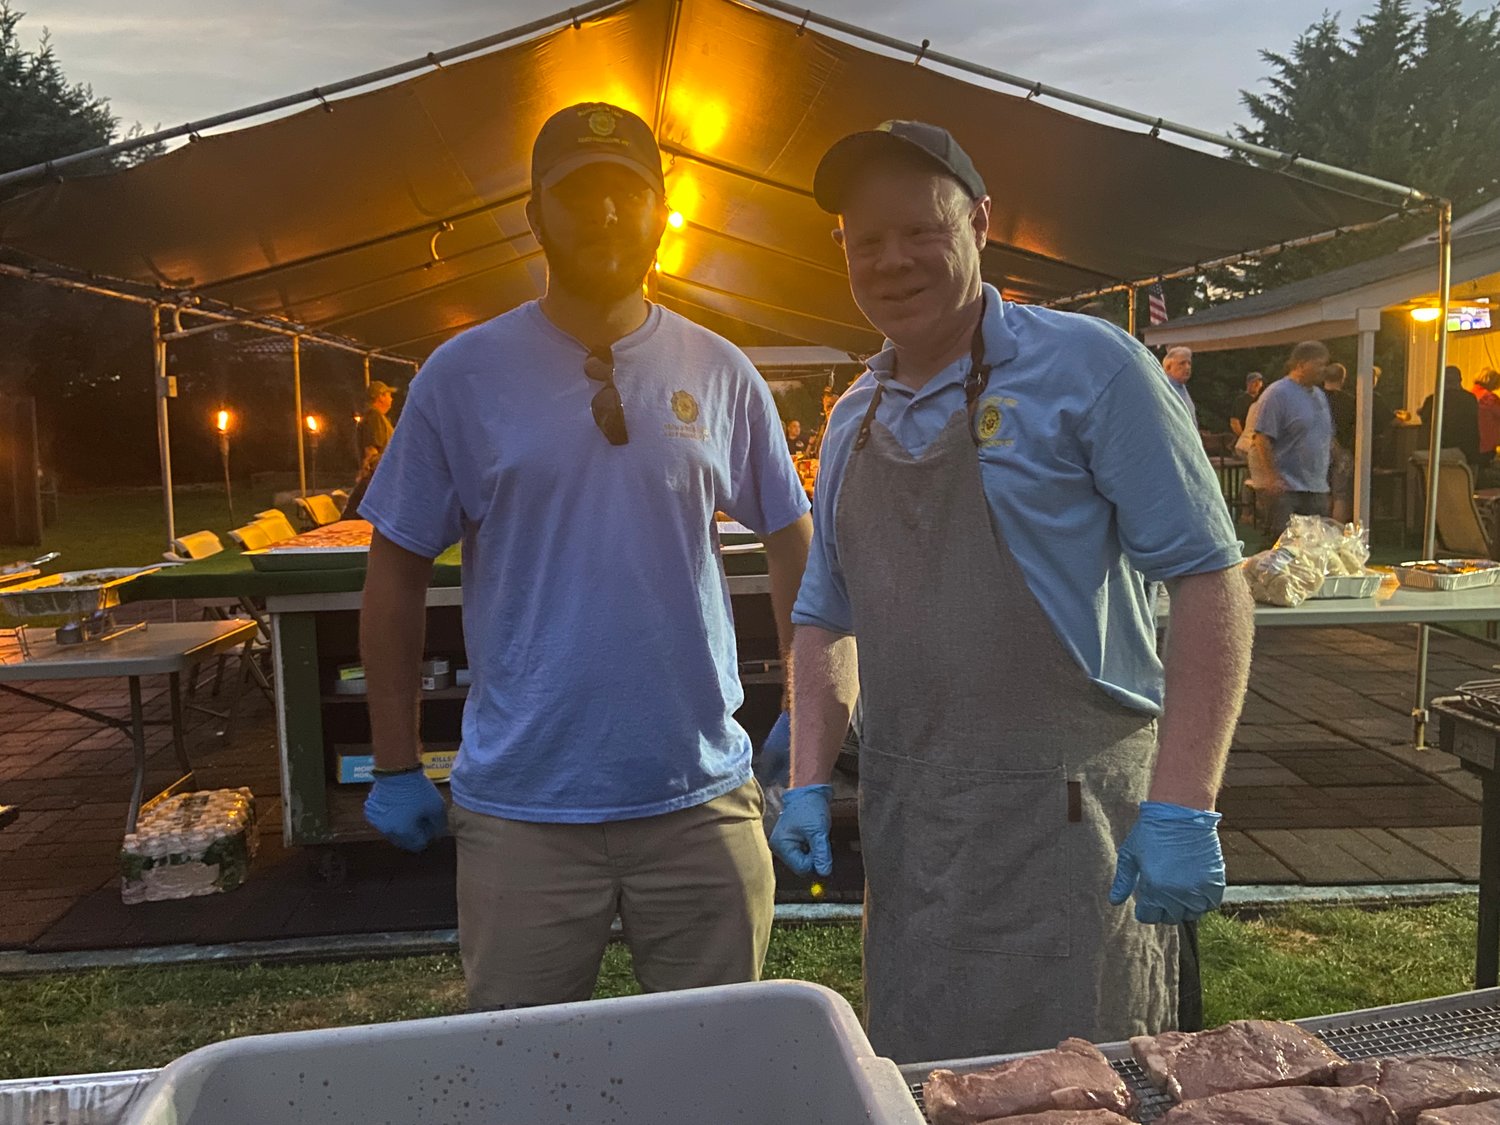 Legion member Mike Leake, right, did most of the cooking for the Steakout. Steven Papagni, left, gave him a helping hand.